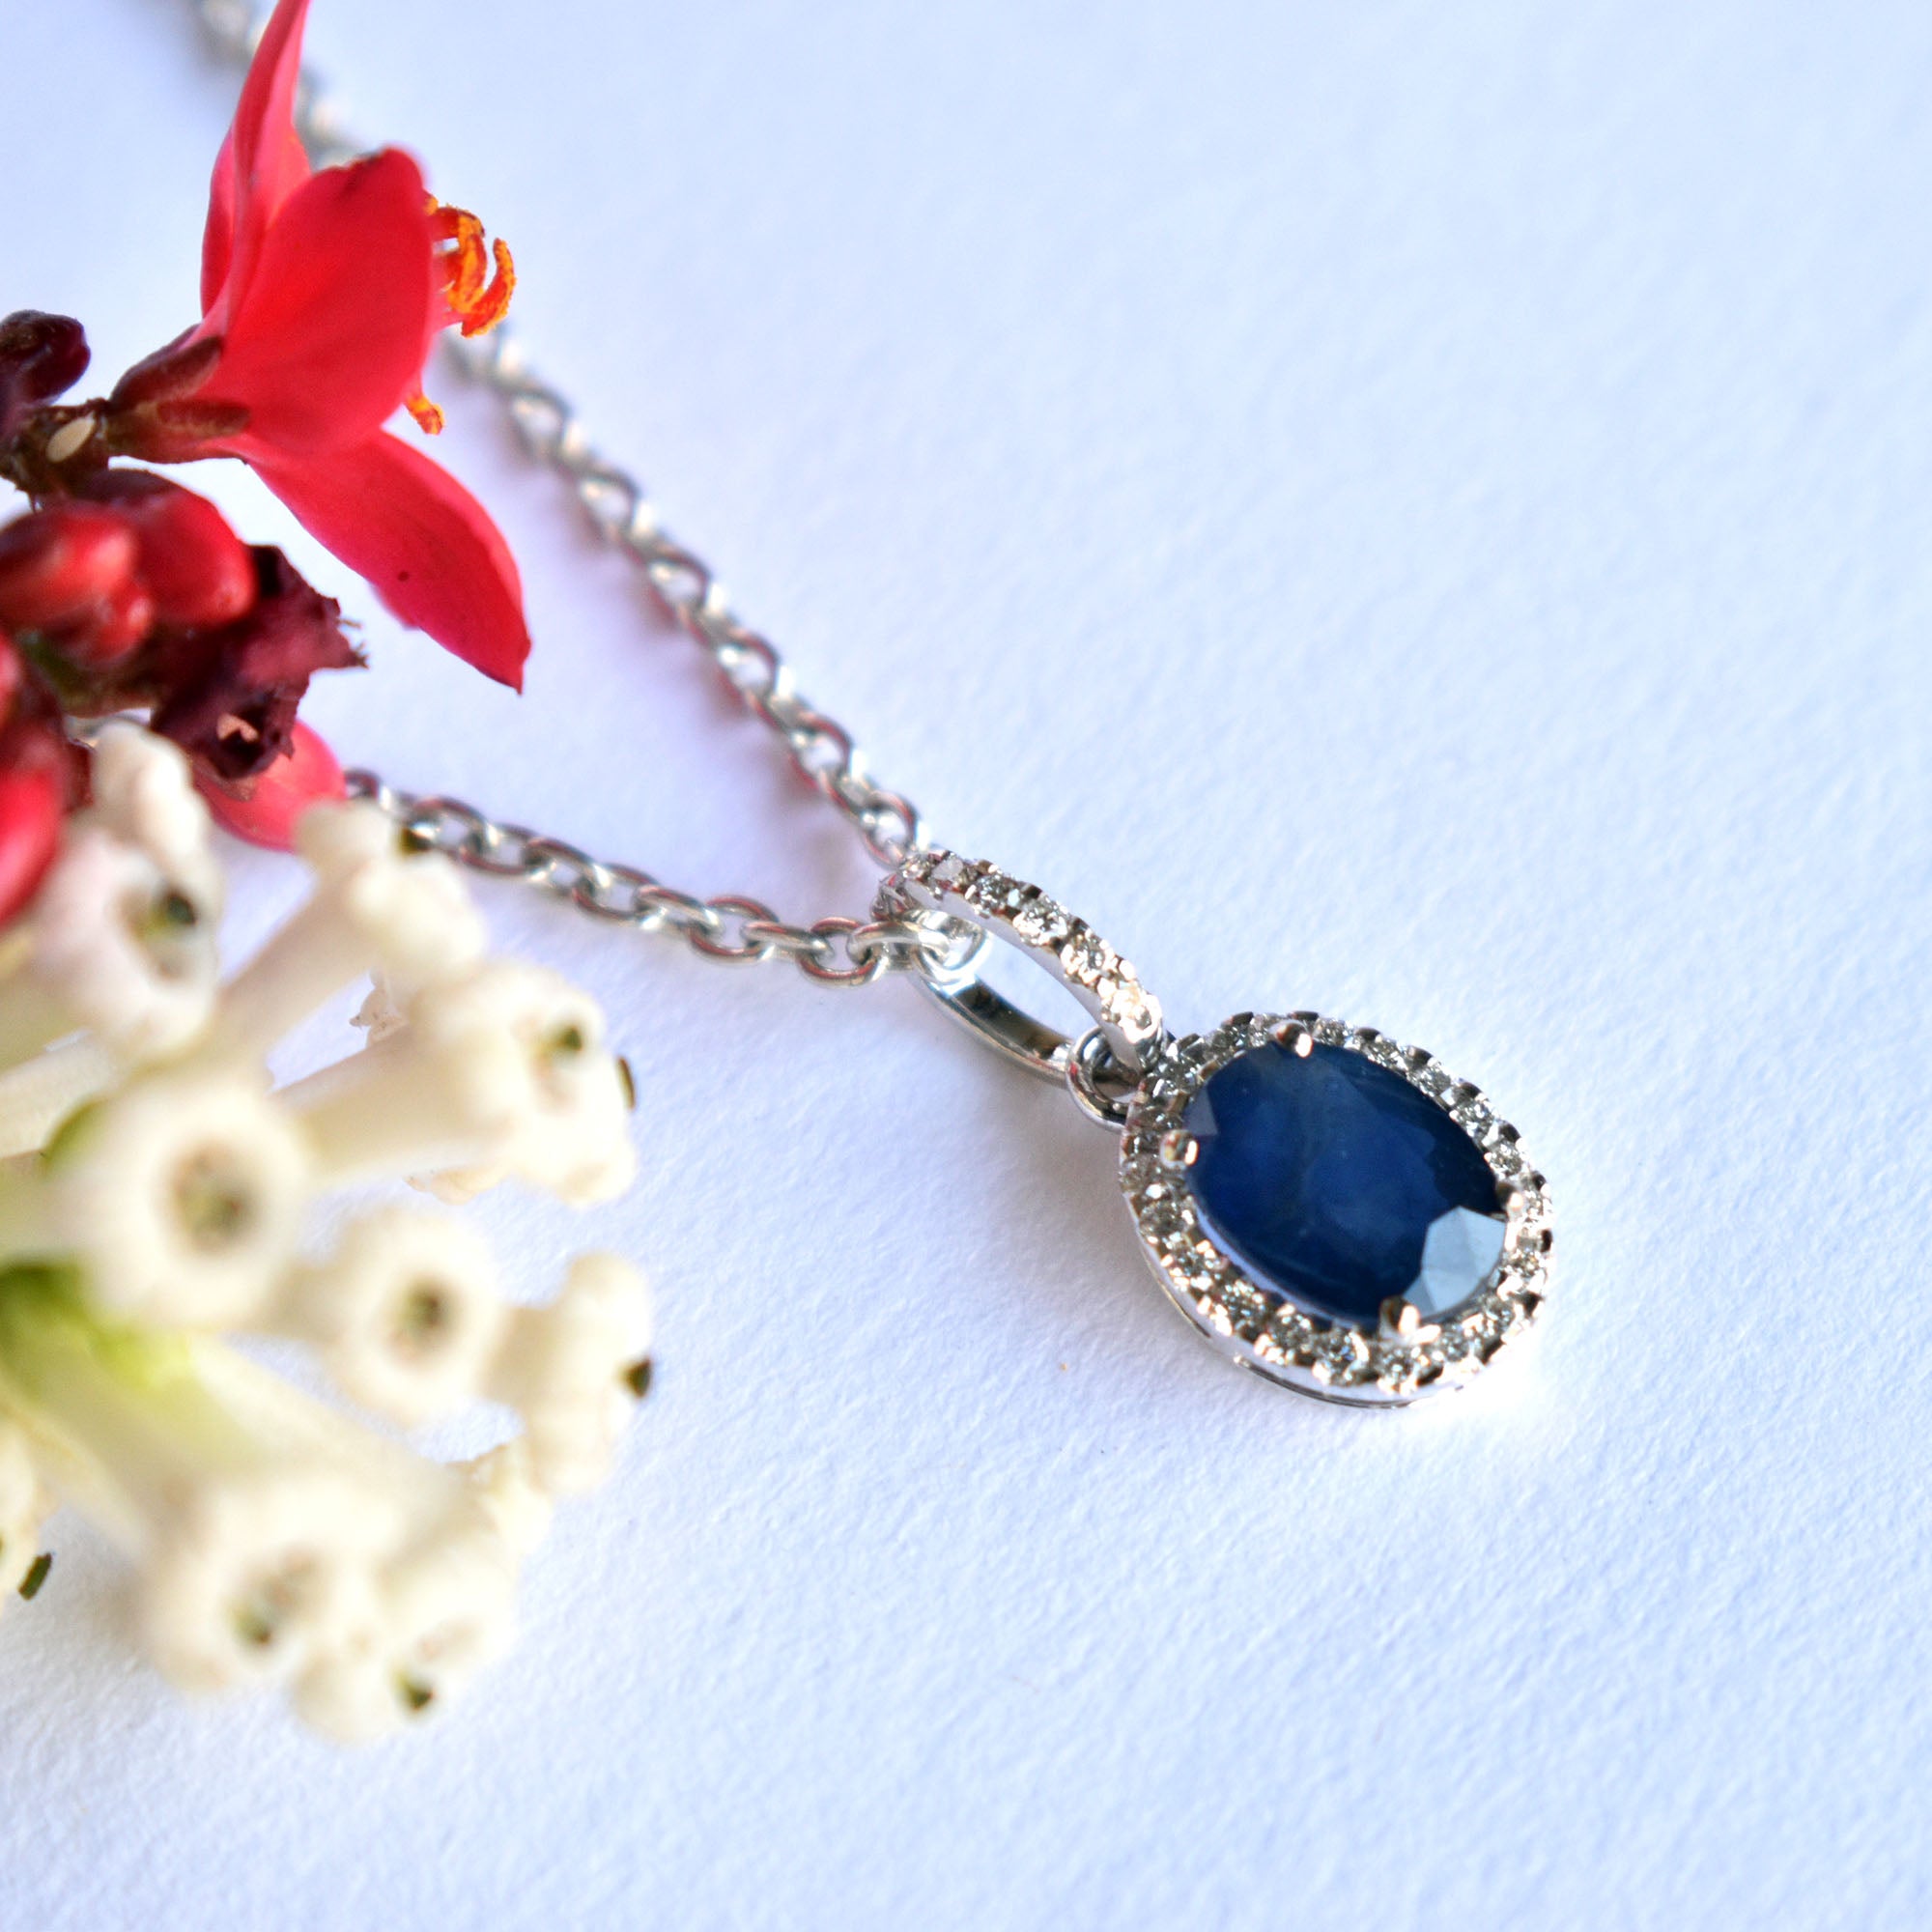 Oval Blue Sapphire Diamond Halo Pendant Necklace in 14K White Gold with Dainty Chain